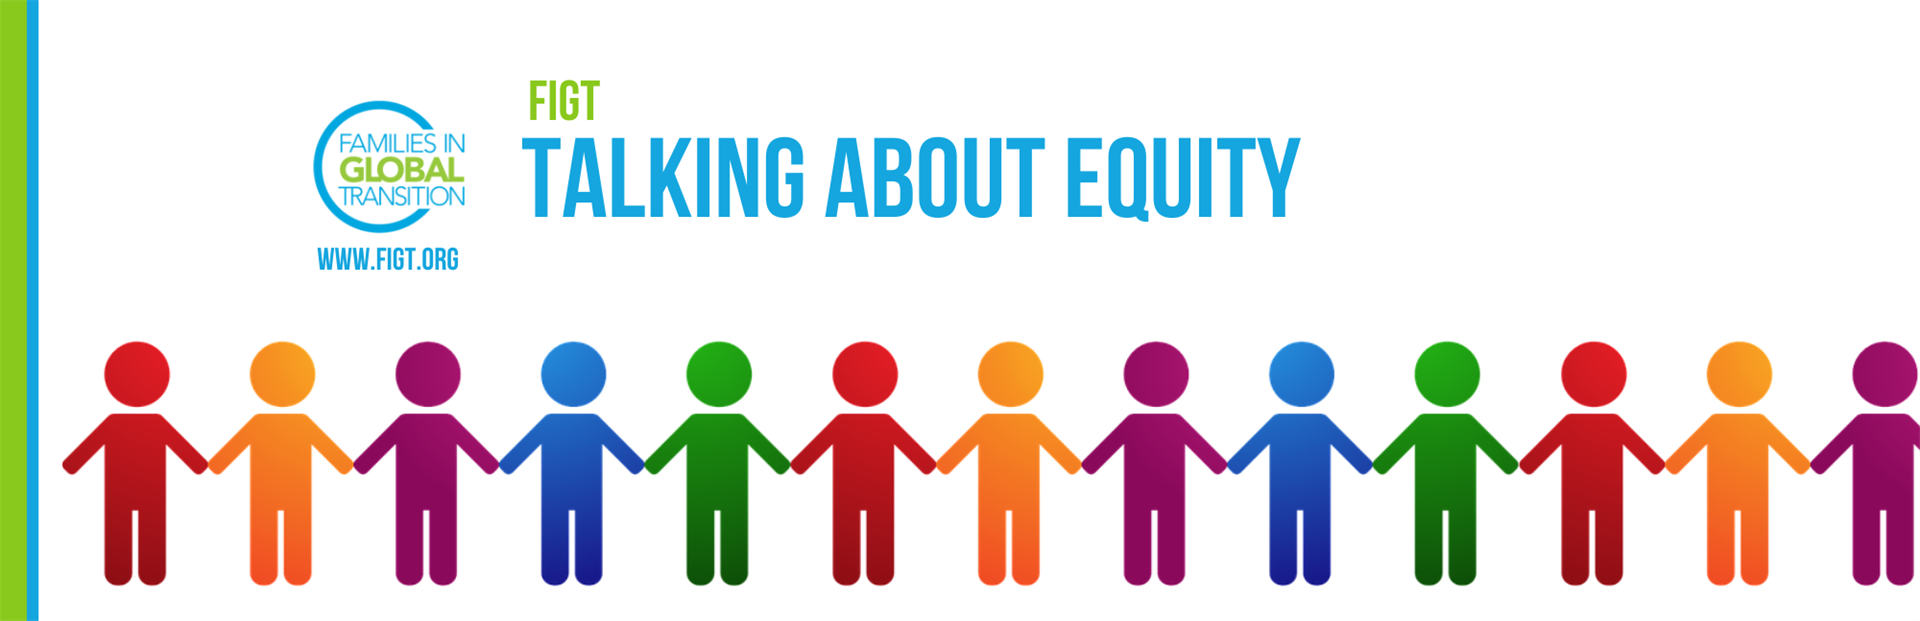 FIGT: Talking about equity, image of many colorful people figures holding hands